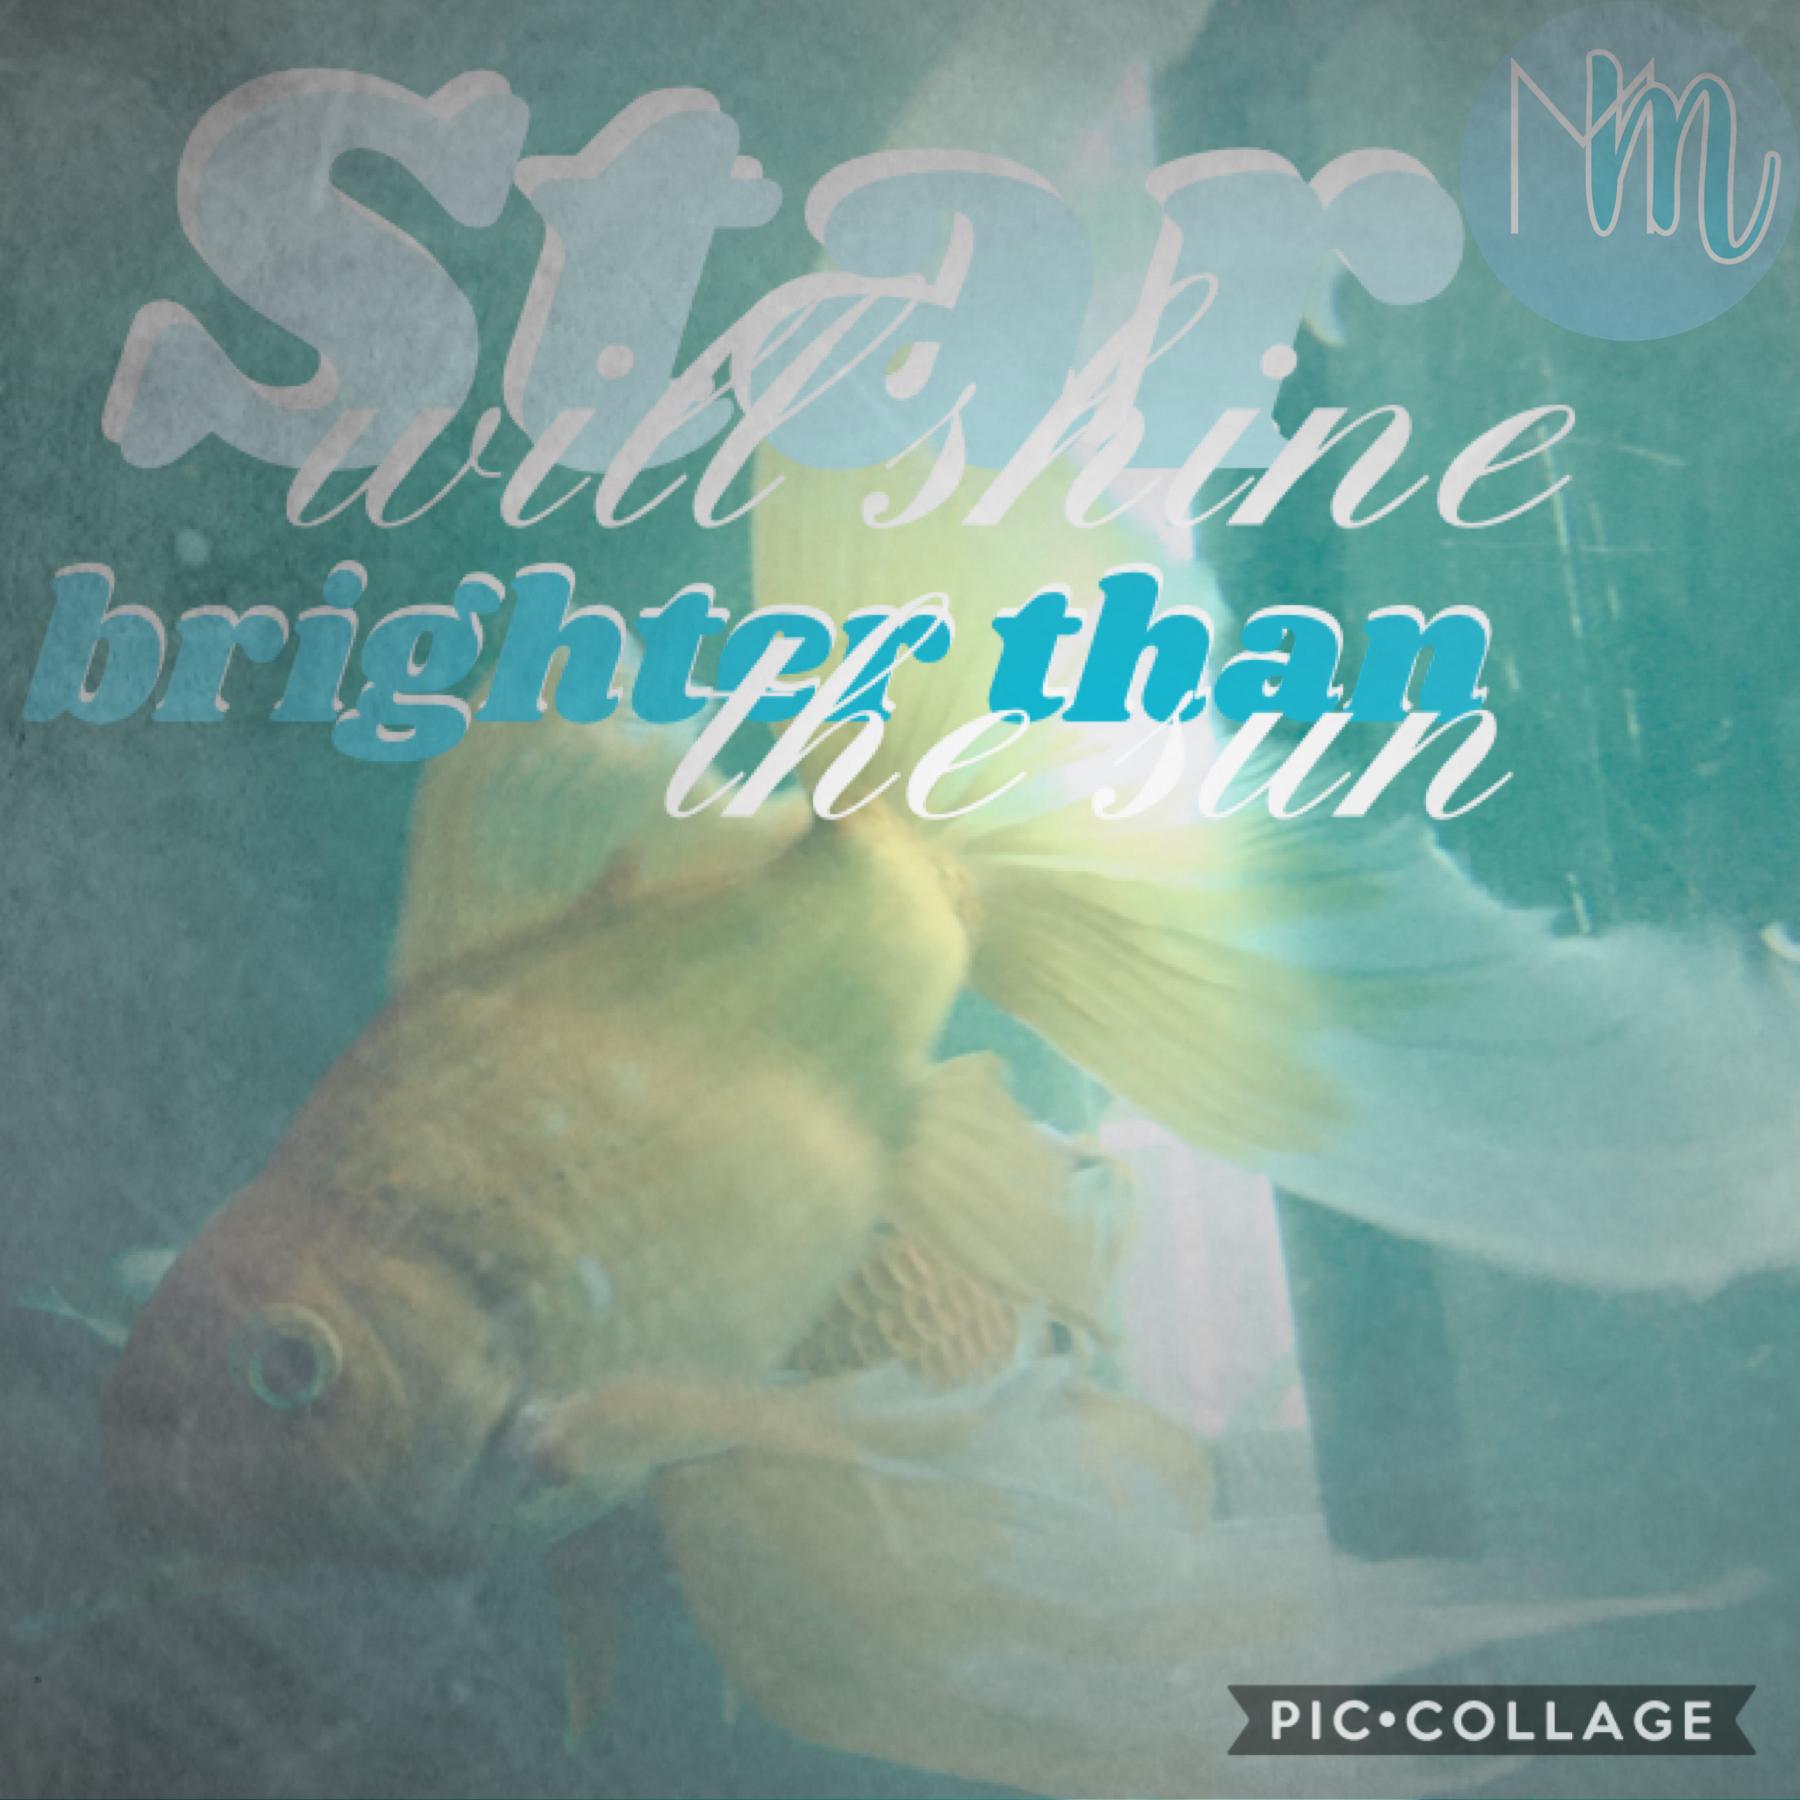 Tap

Inspired by the beautiful featured feed! I love how PicCollage is featuring new collagers here! This is my fish, Star, and Shimmer in the background. Hope you like it!